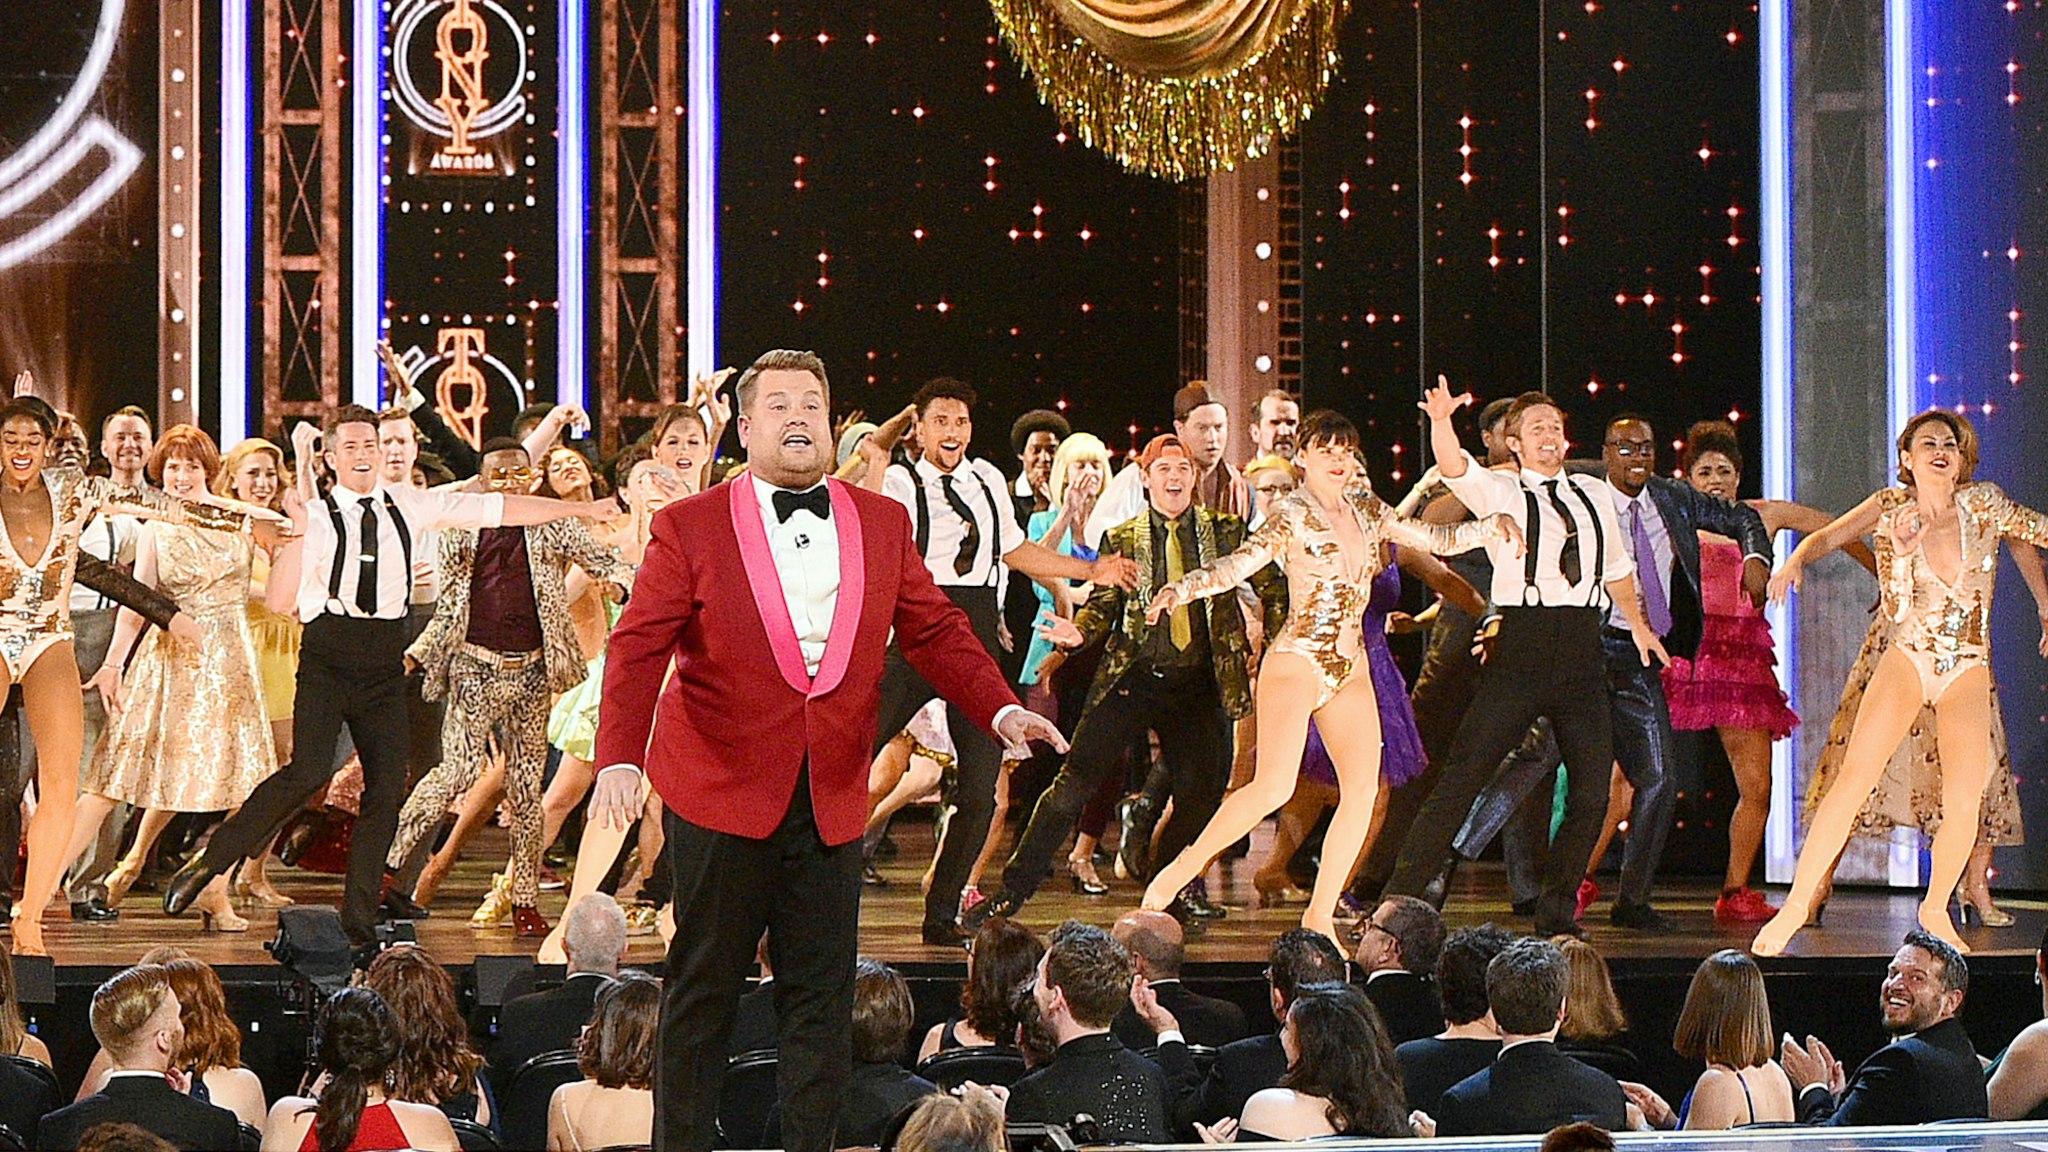 James Corden performs onstage during the 2019 Tony Awards at Radio City Music Hall on June 9, 2019 in New York City.